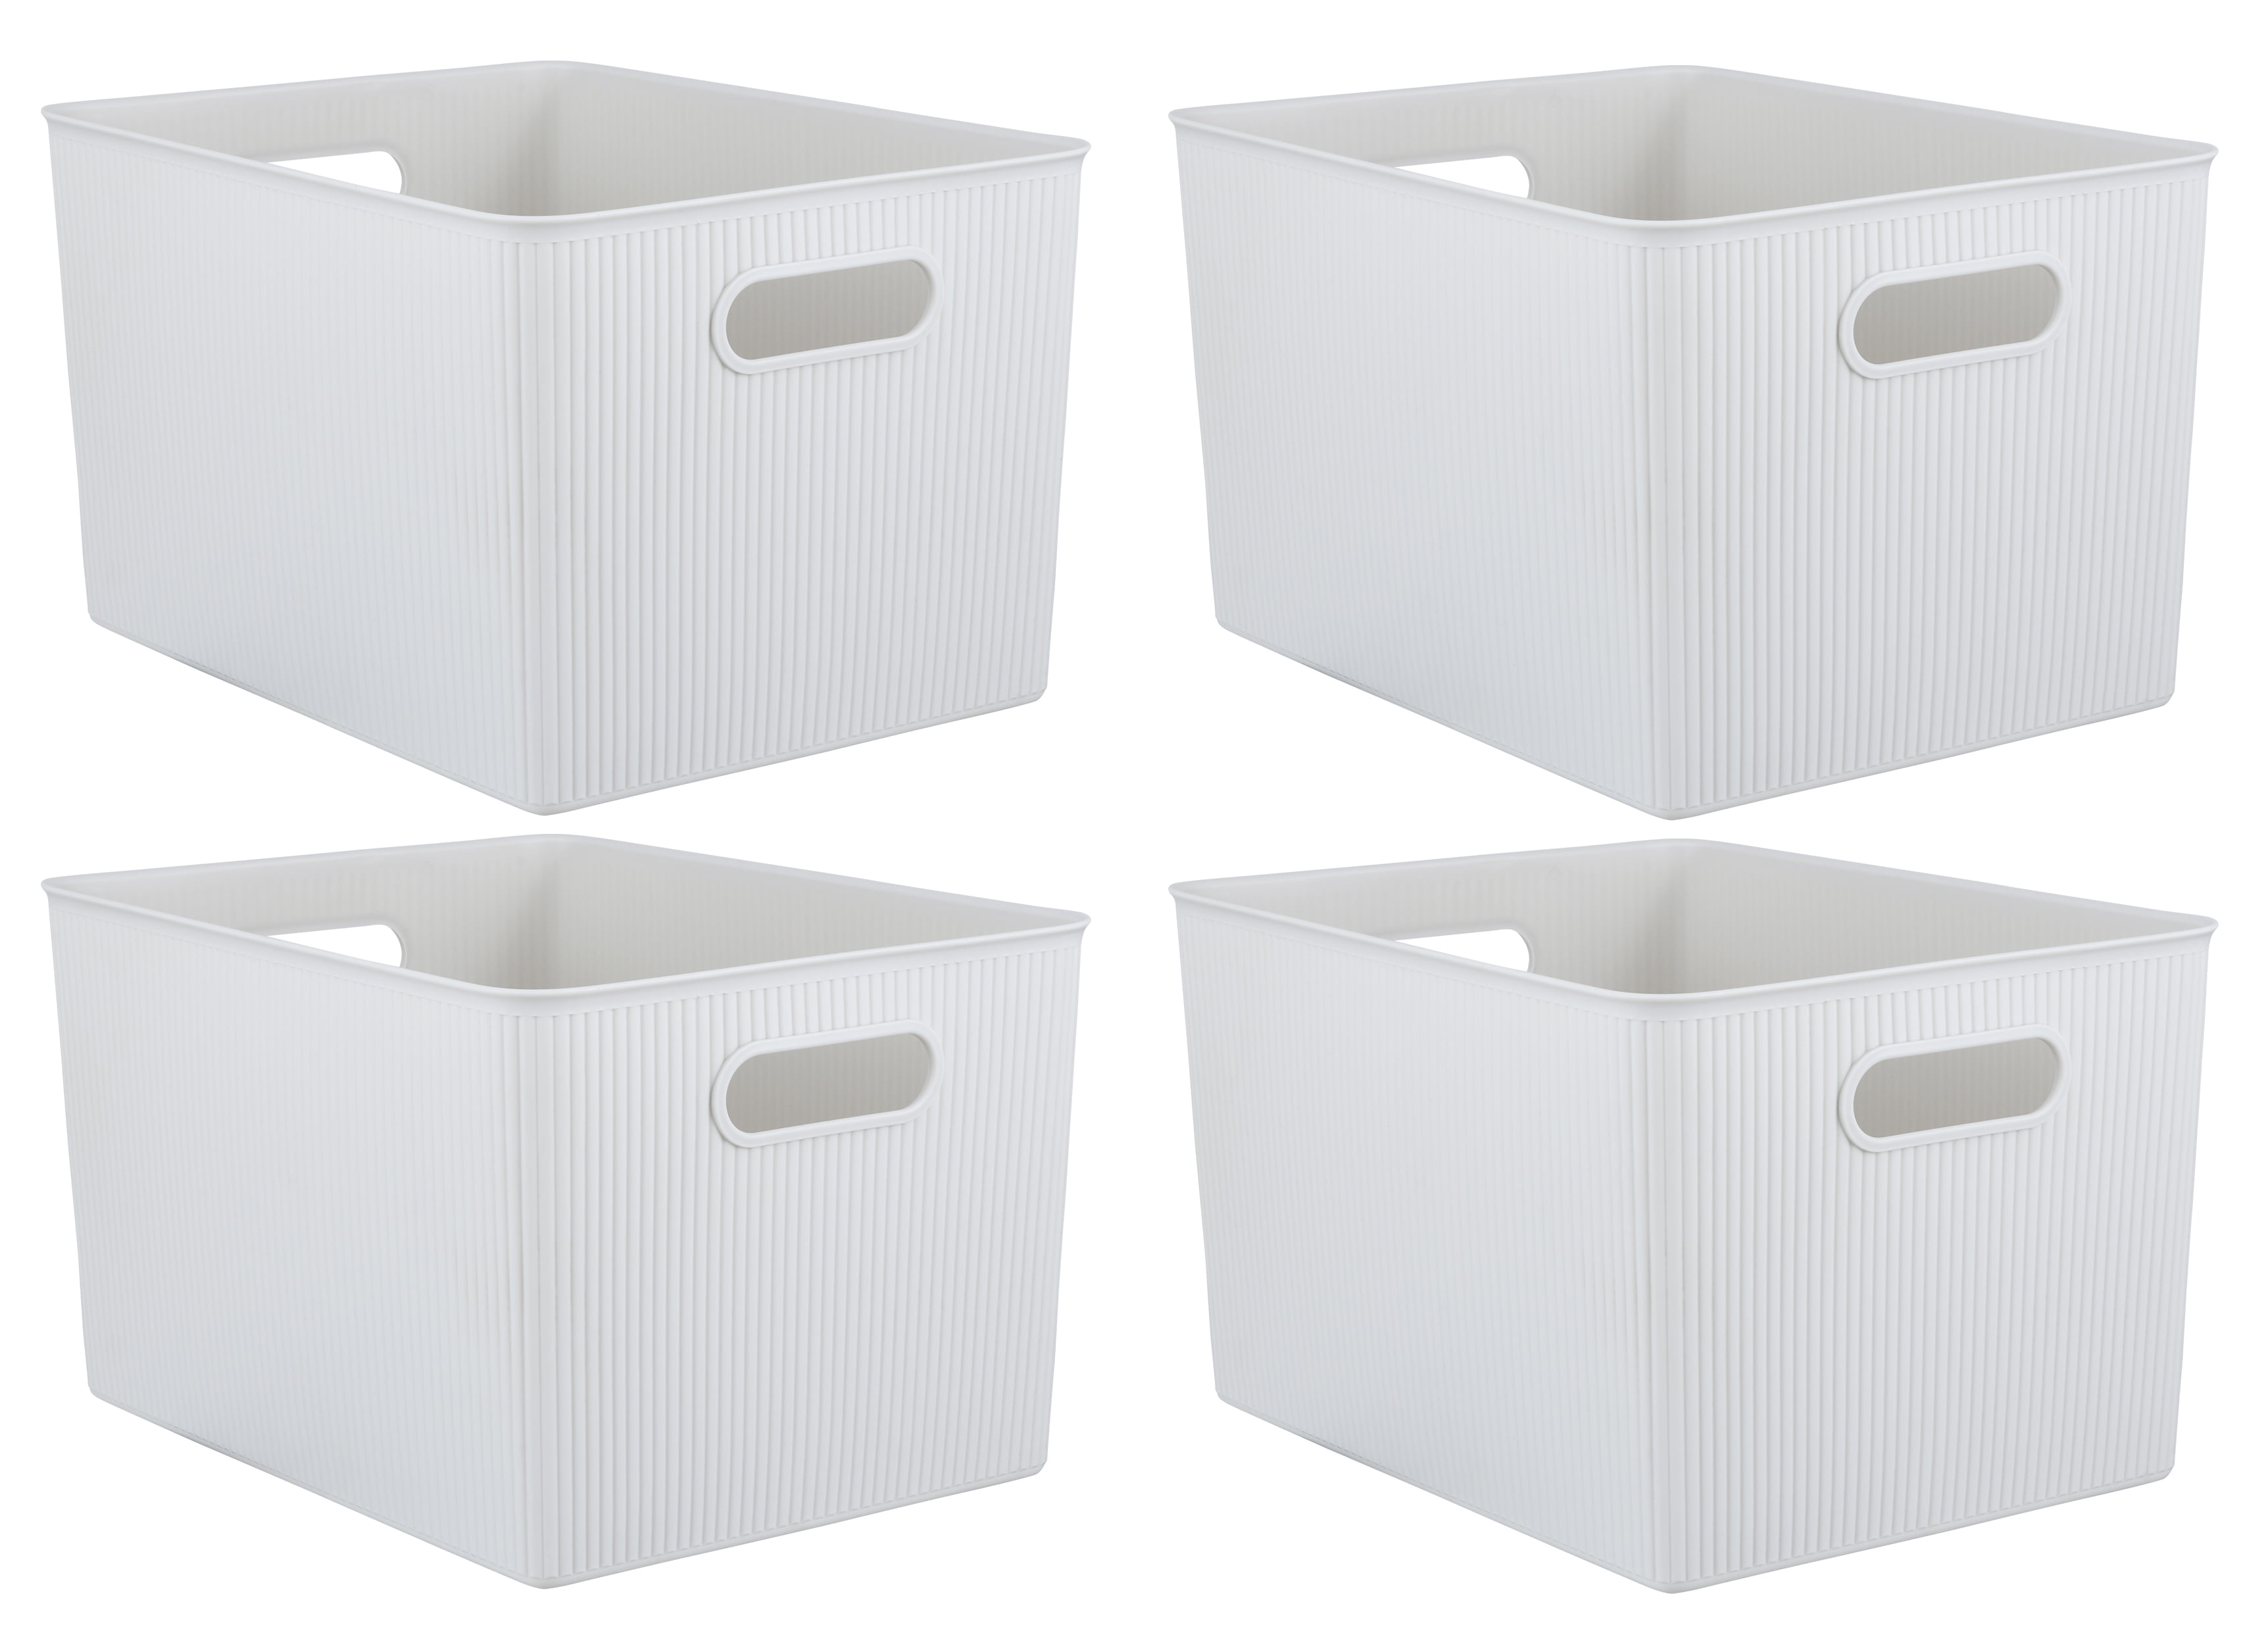 Waikhomes 4 Pack Large Plastic Storage Boxes, Large Lidded Storage Bins  with Wheels, 70 L